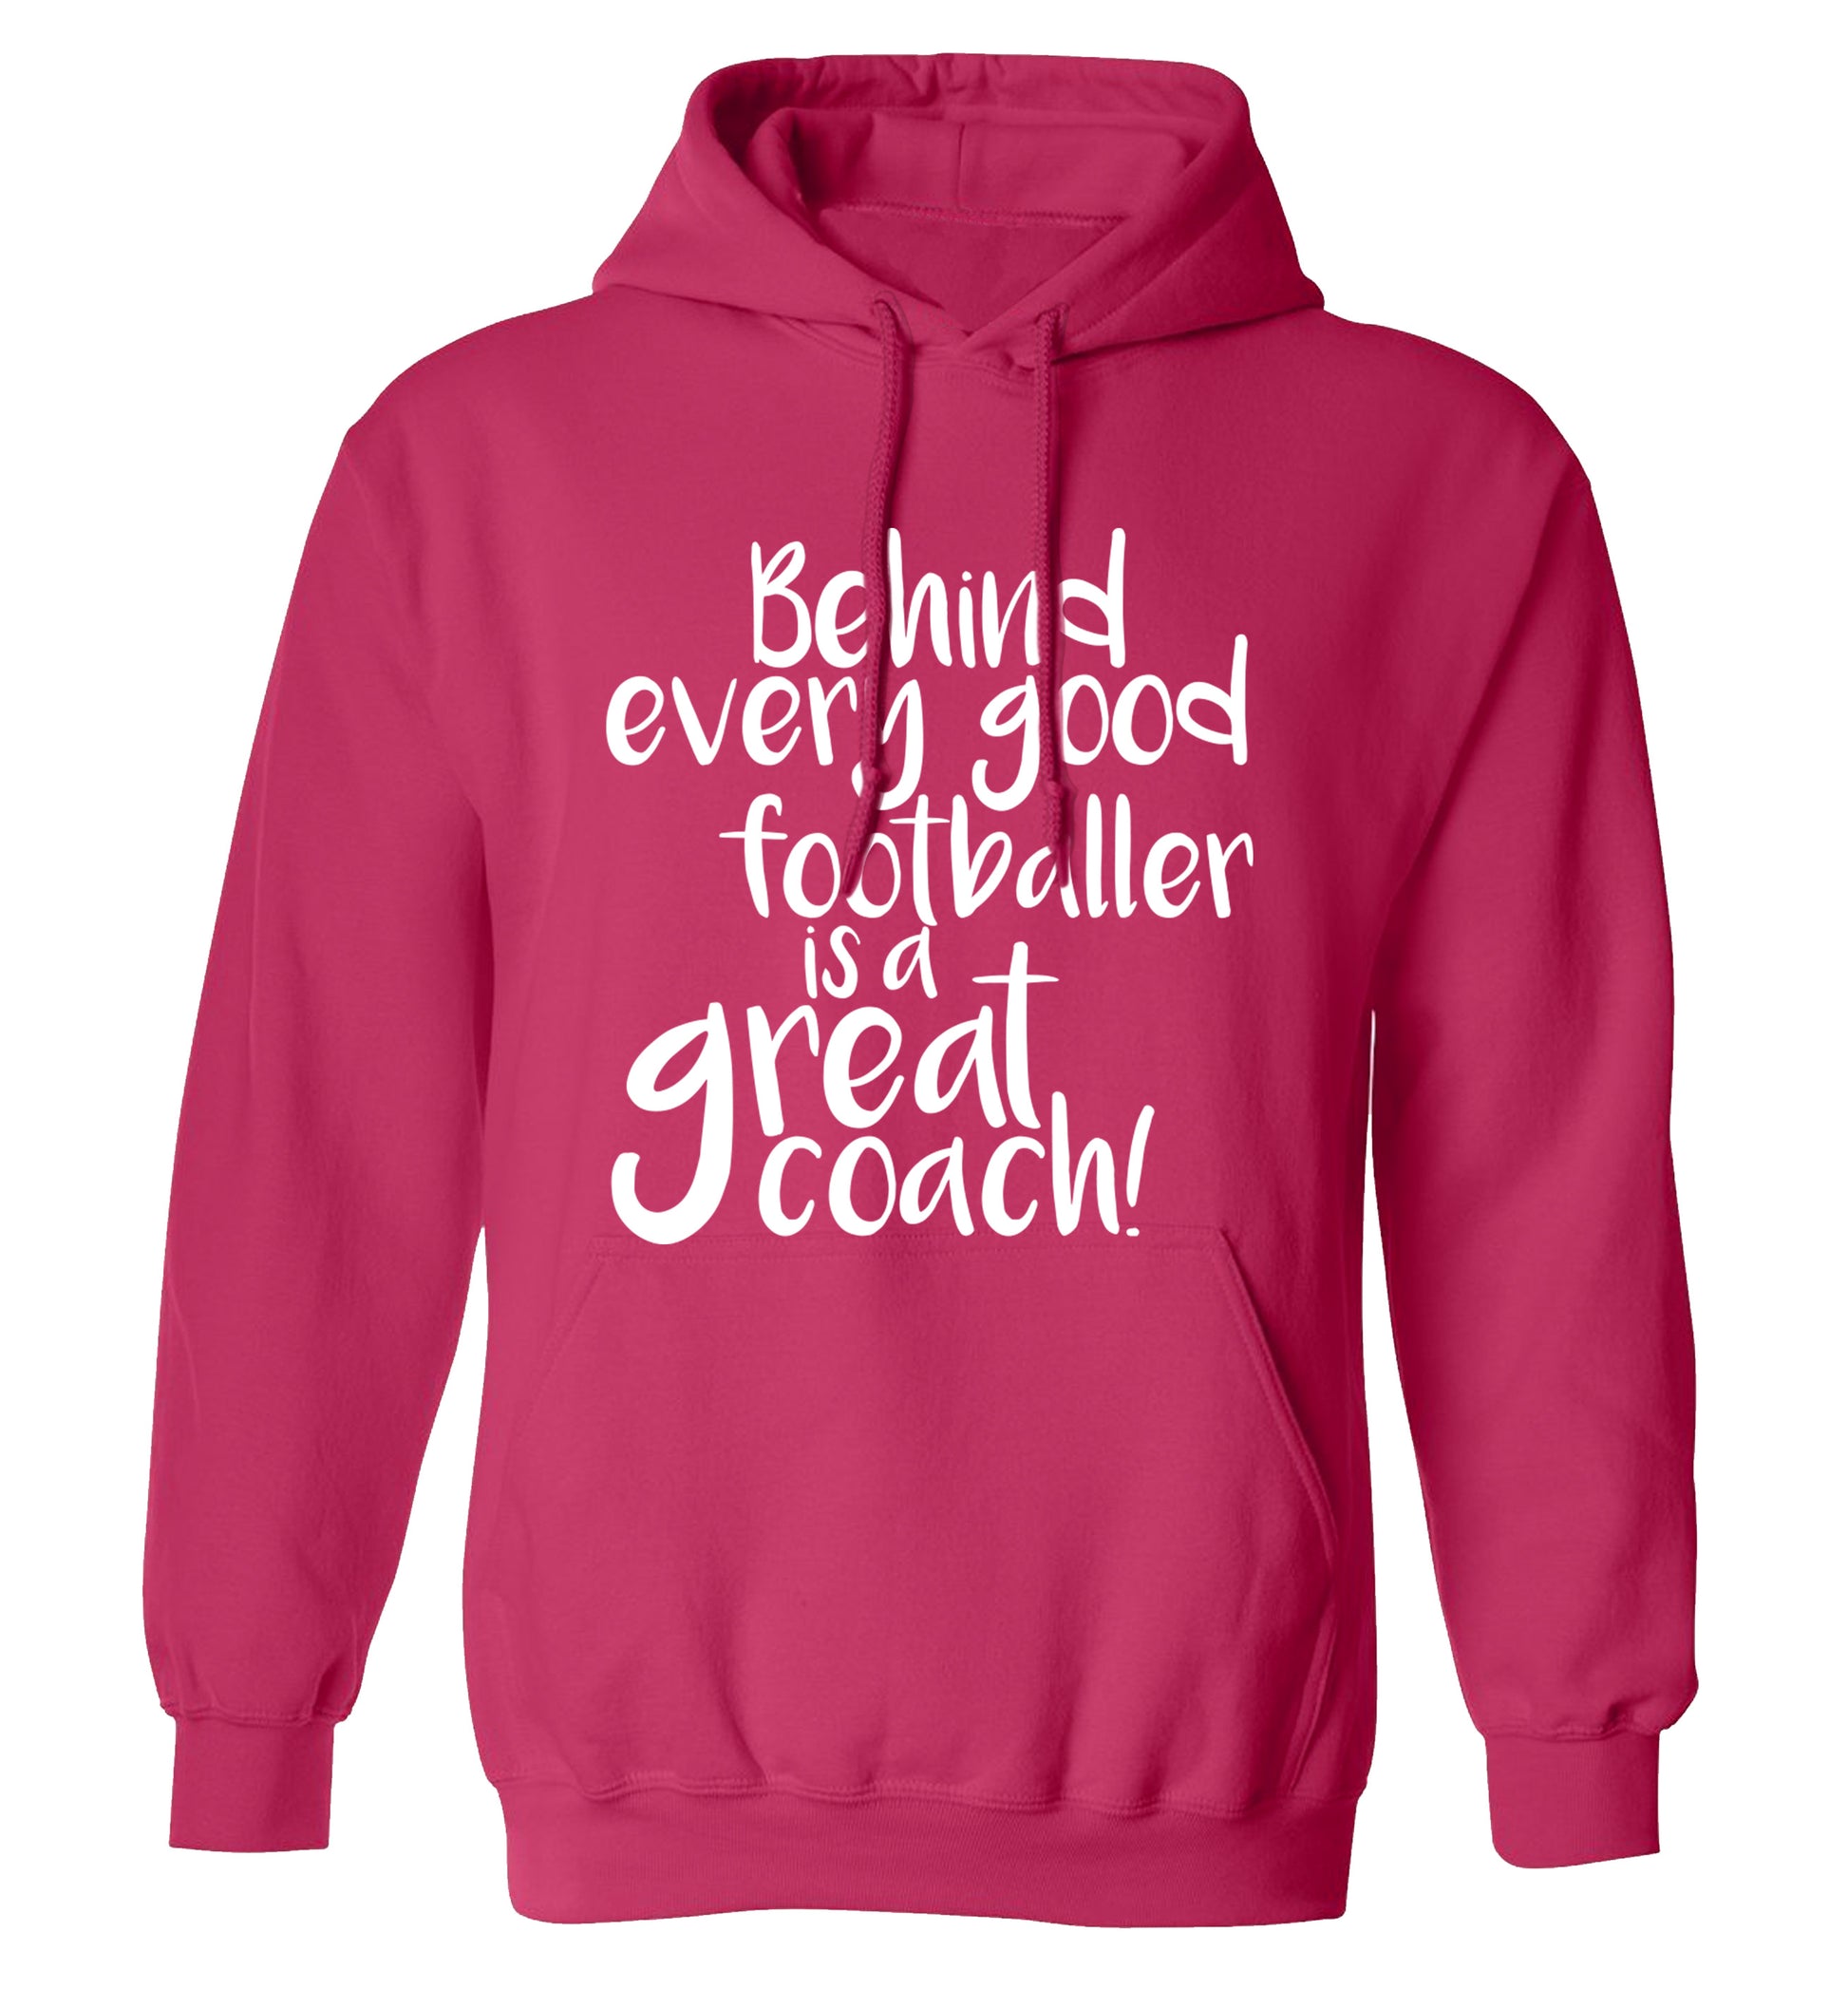 Behind every good footballer is a great coach! adults unisexpink hoodie 2XL